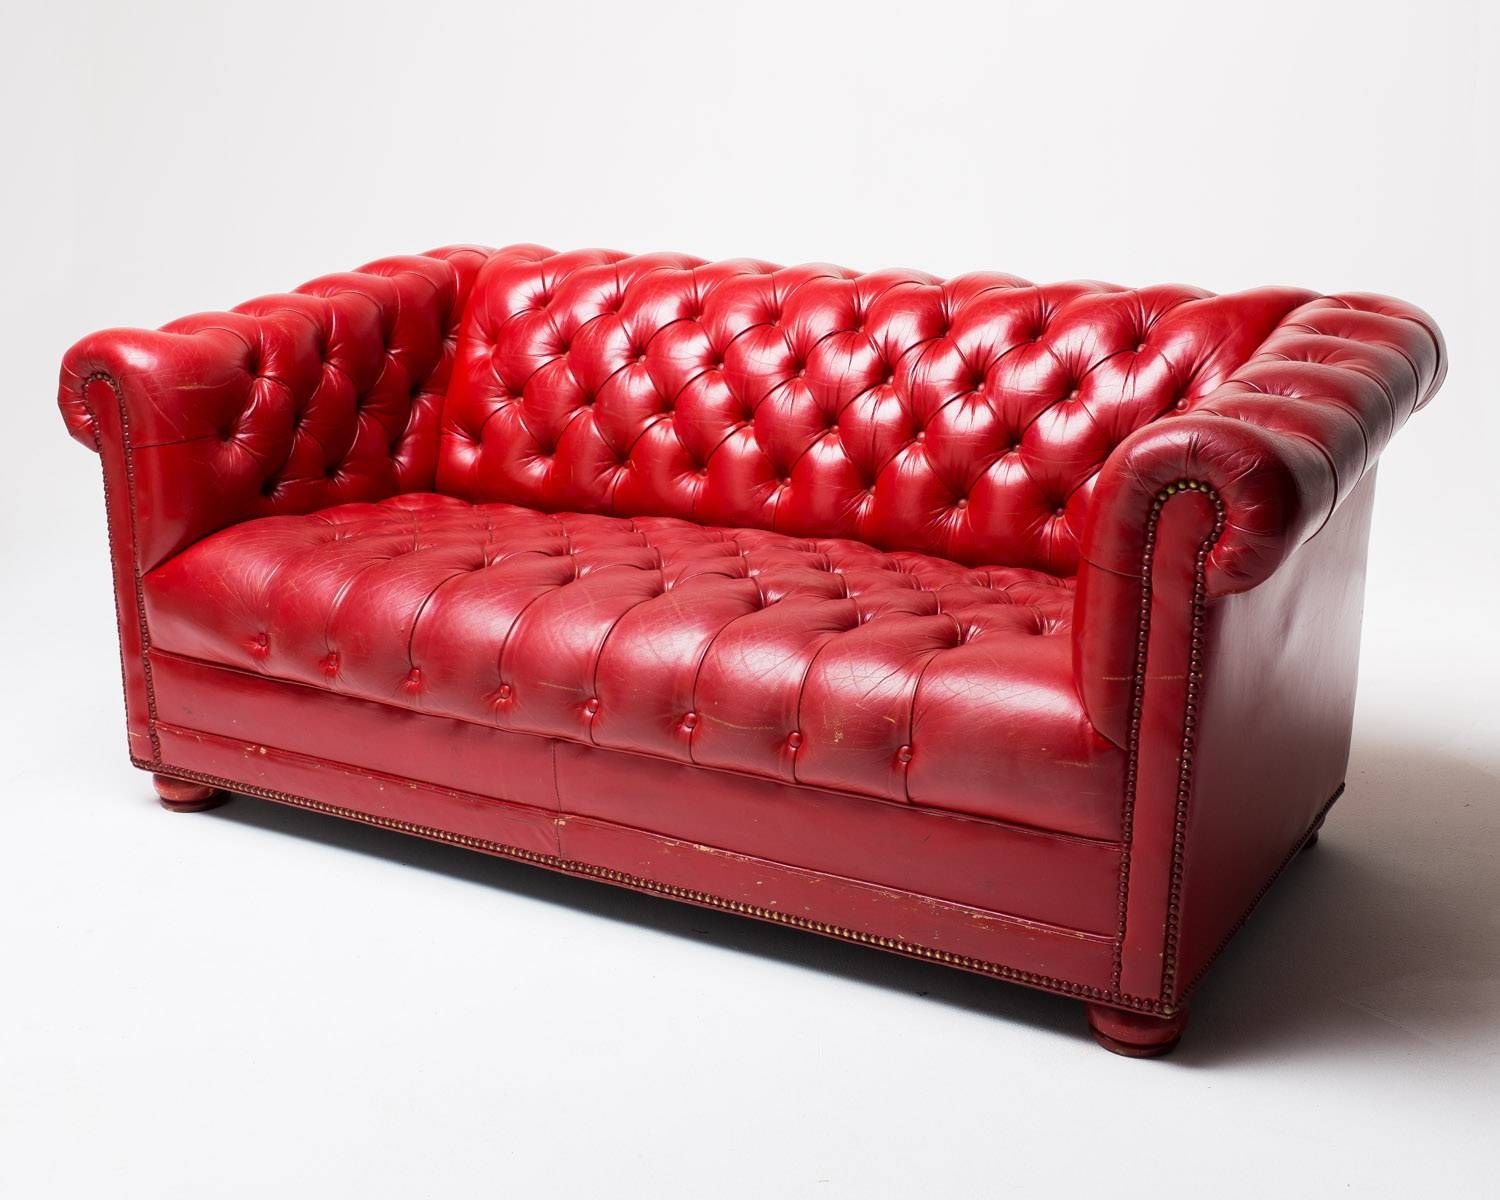 Sofas Center : Living Room Furniture Leather Chaise And Classic Within Unusual Sofas (View 11 of 25)